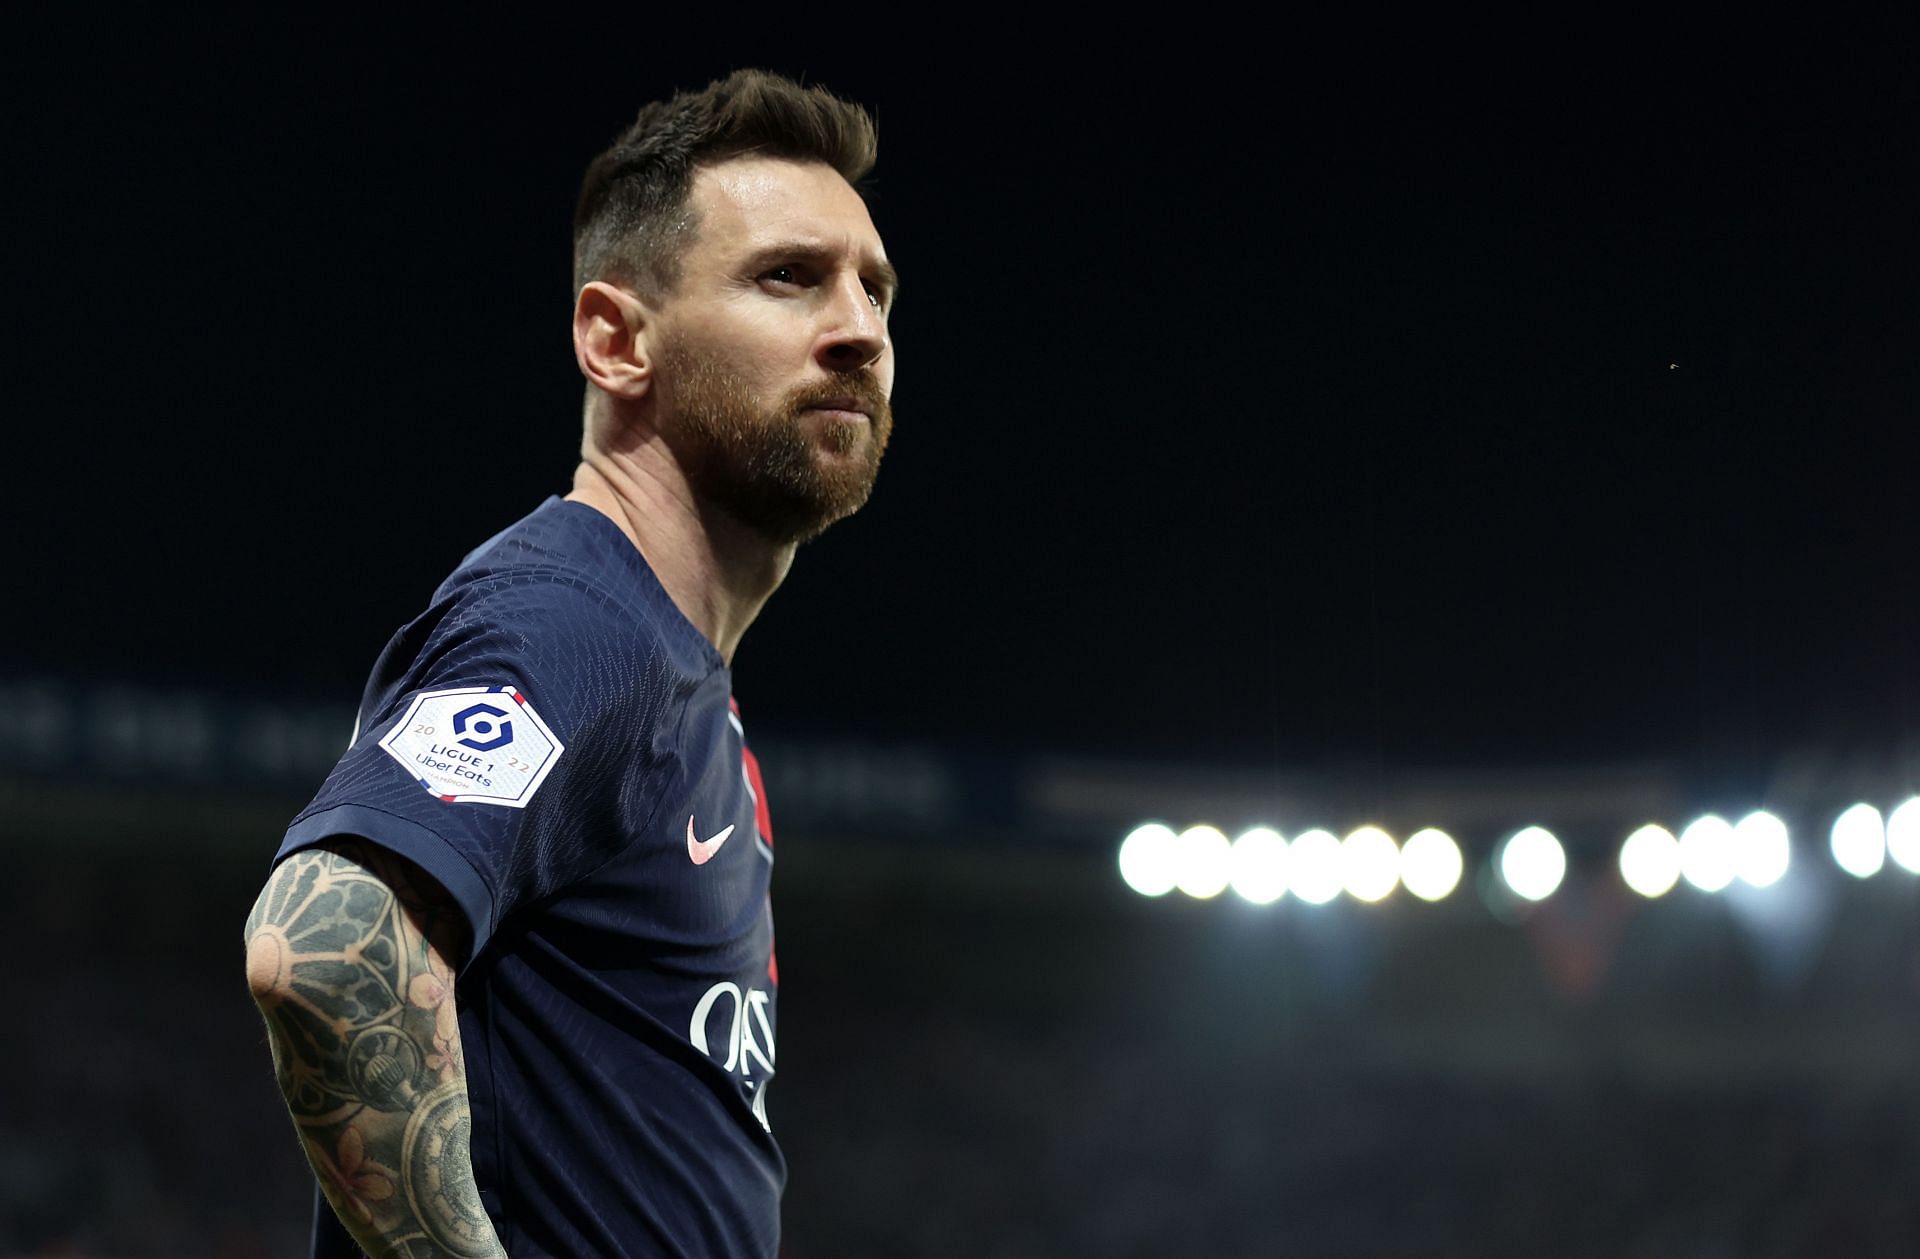 Lionel Messi struggled in his final appearance for PSG.